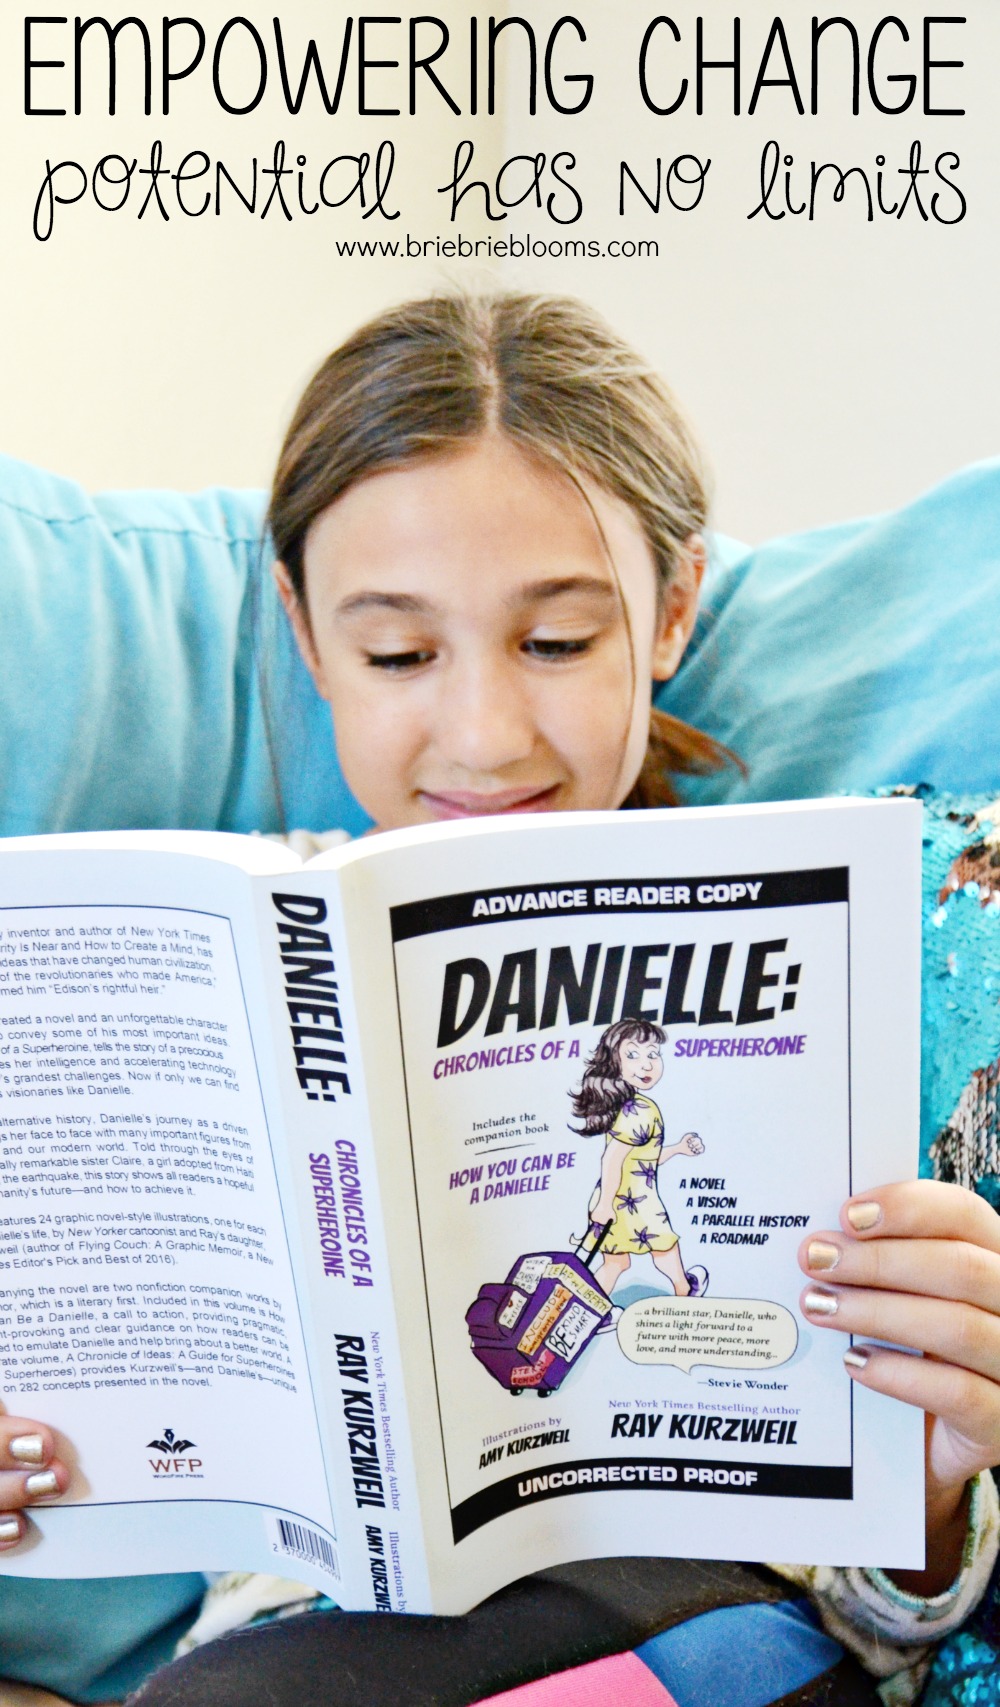 Danielle, Chronicles of a Superherioine book is a great tool to empowering change and teaching your child their potential has no limits.